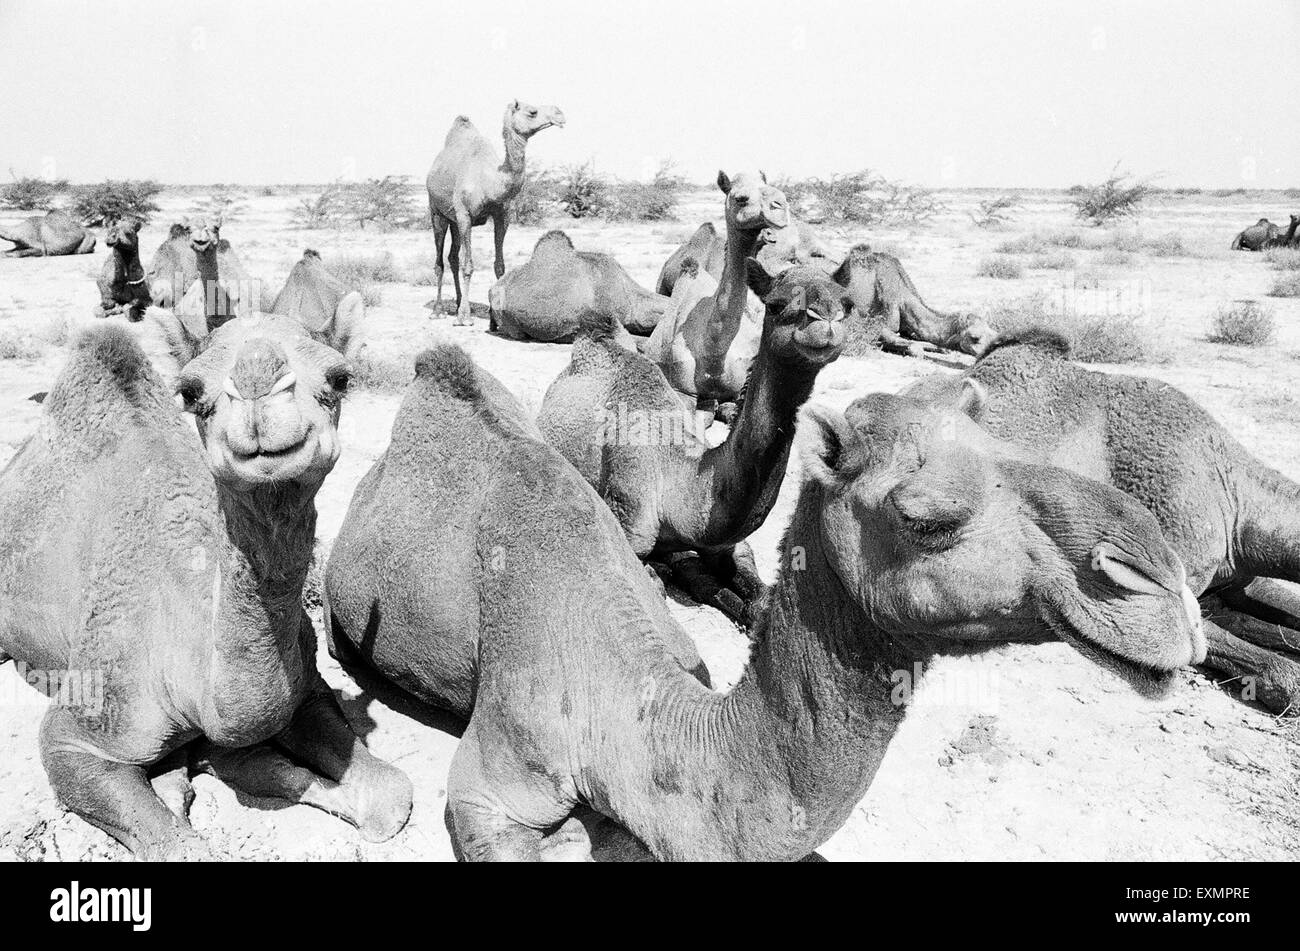 Gujarat camels Black and White Stock Photos & Images - Alamy